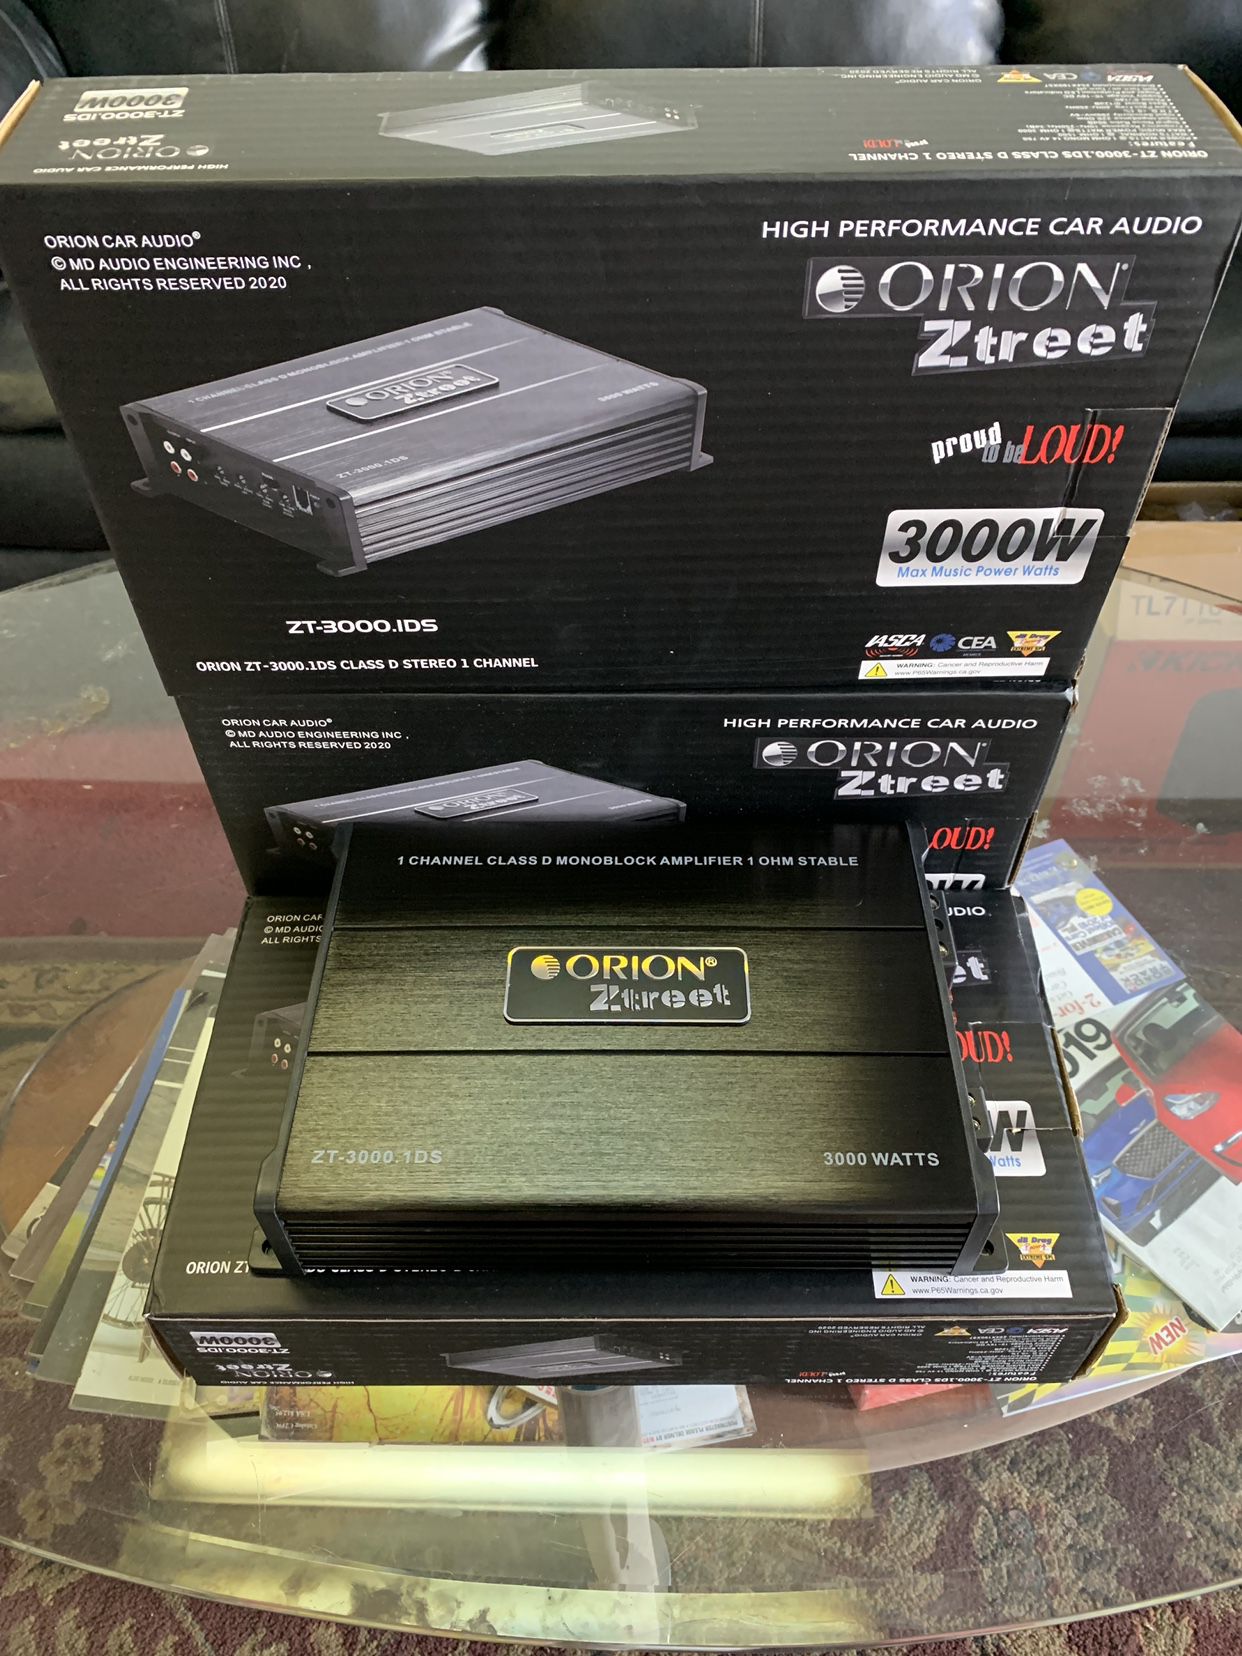 Orion Car Audio . Car Stereo Amplifier . 3000 watts Class D . Holiday Super Sale ! $109 While They Last . New